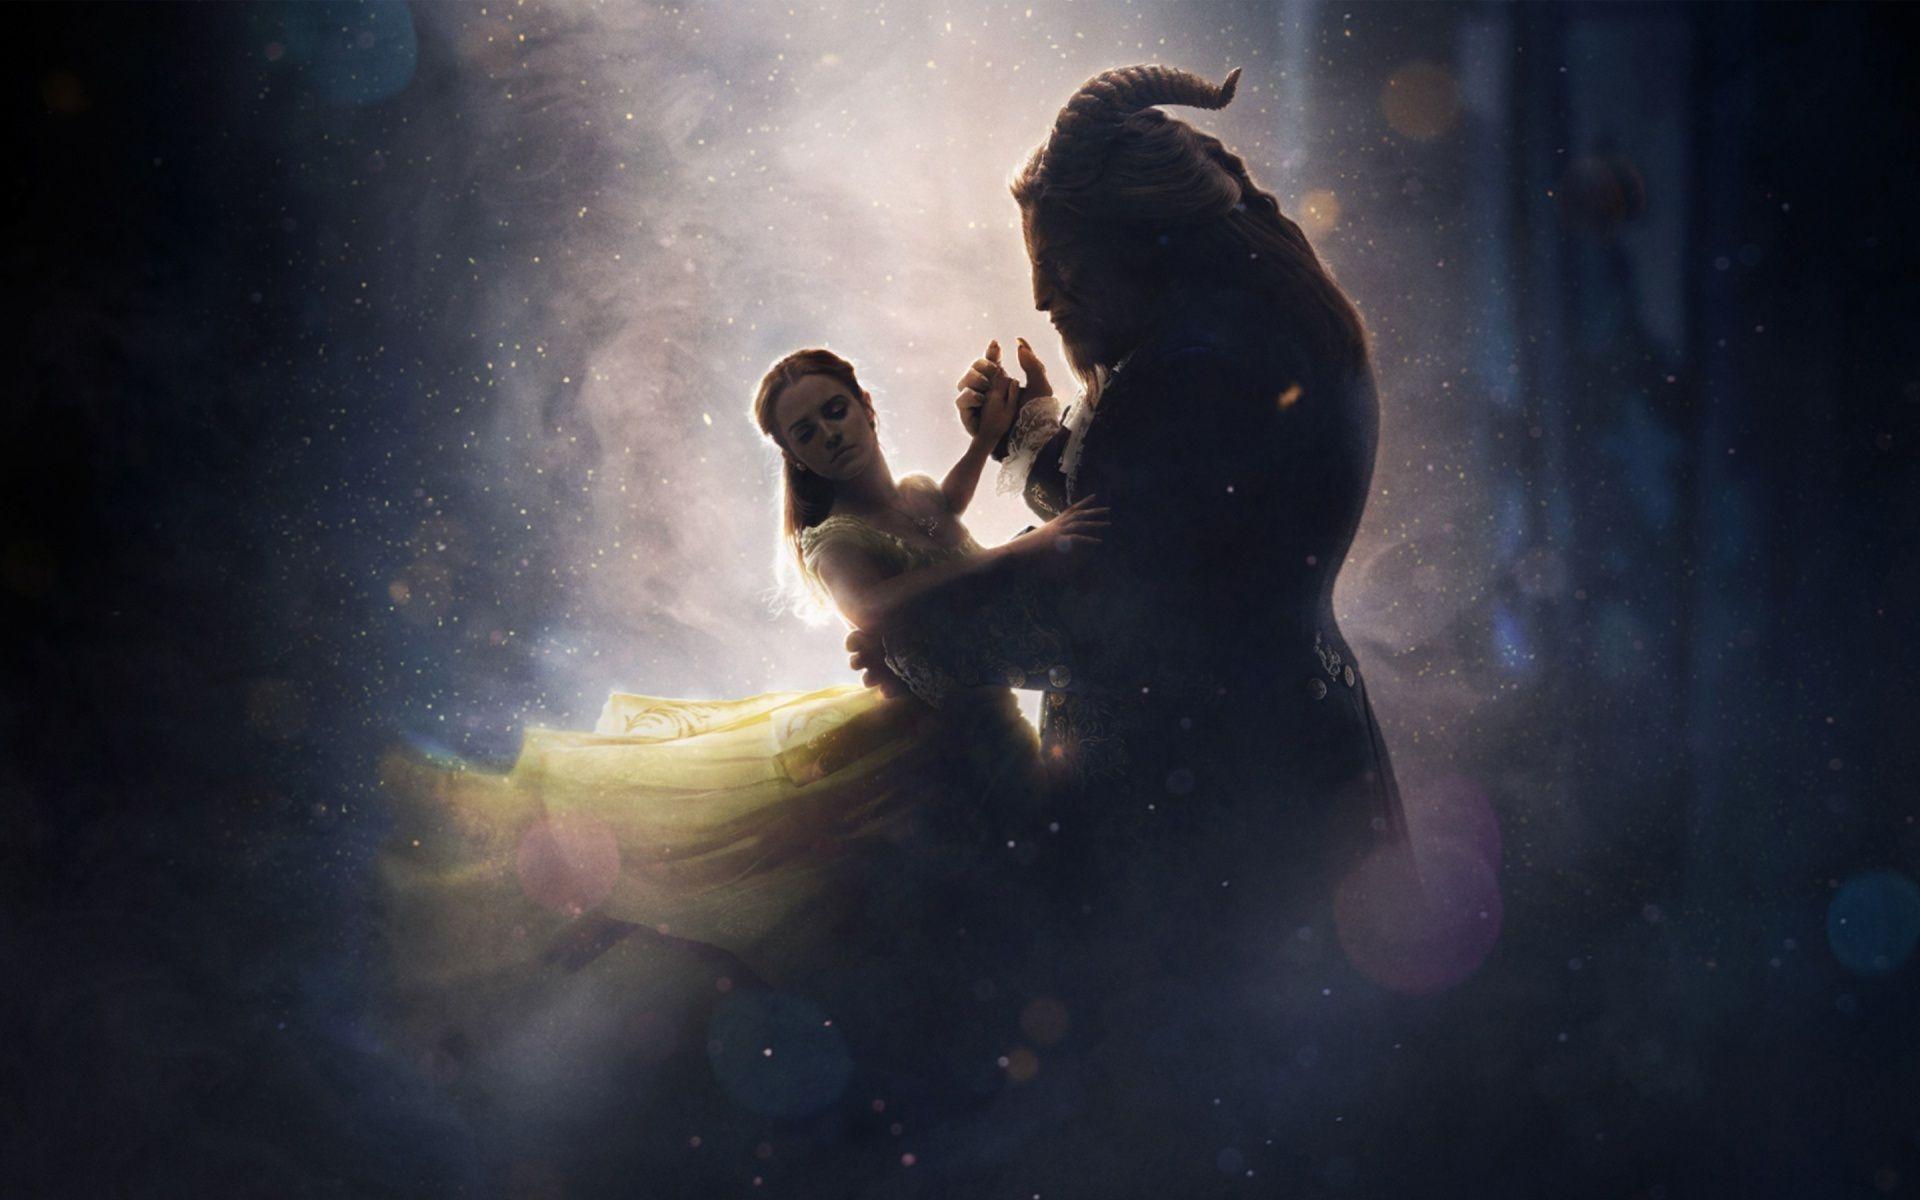 Beauty And The Beast Wallpapers 2K Backgrounds, Wallpaper, Pics, Photos